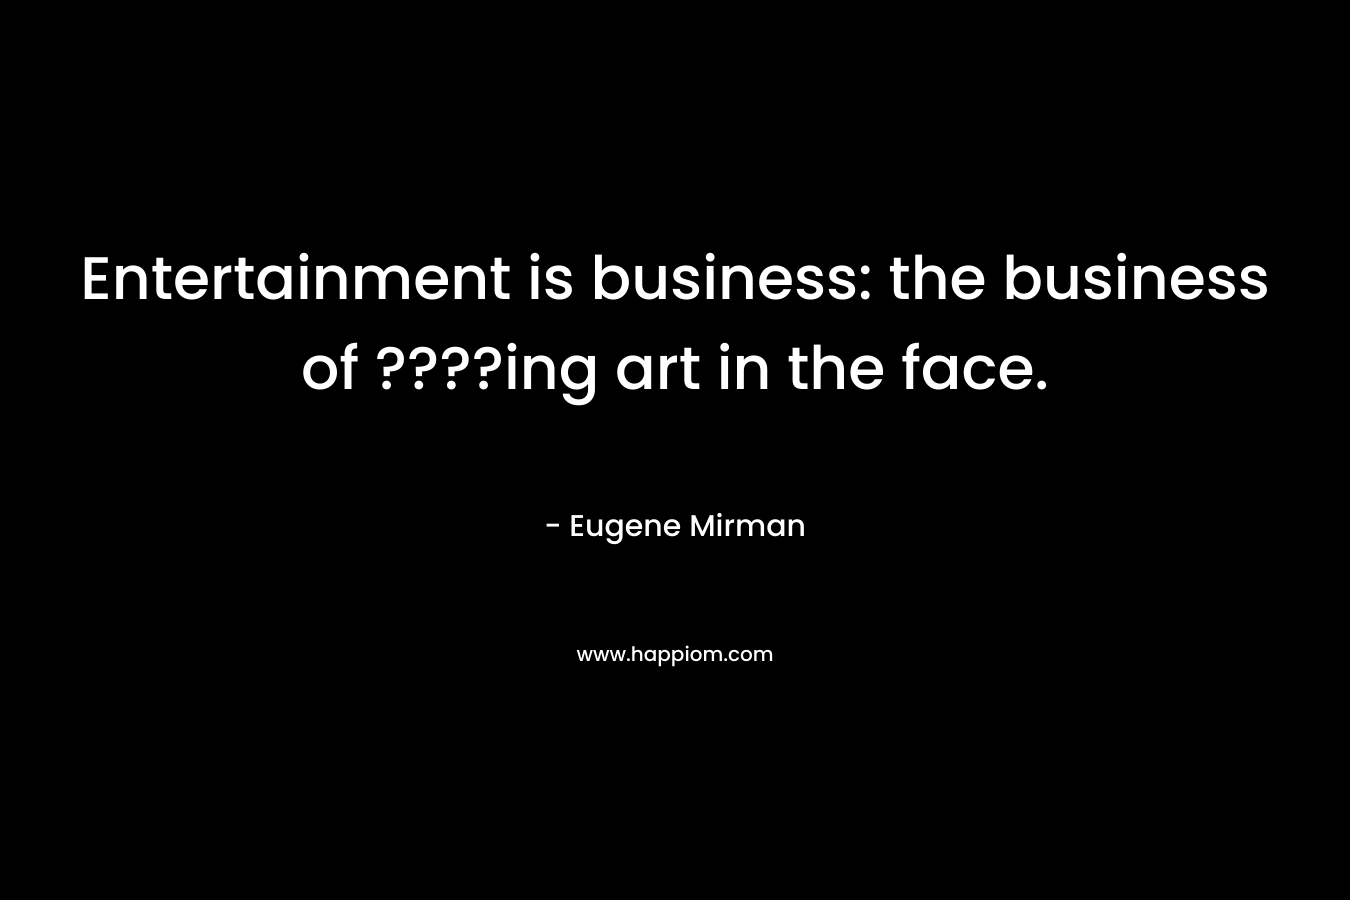 Entertainment is business: the business of ????ing art in the face.